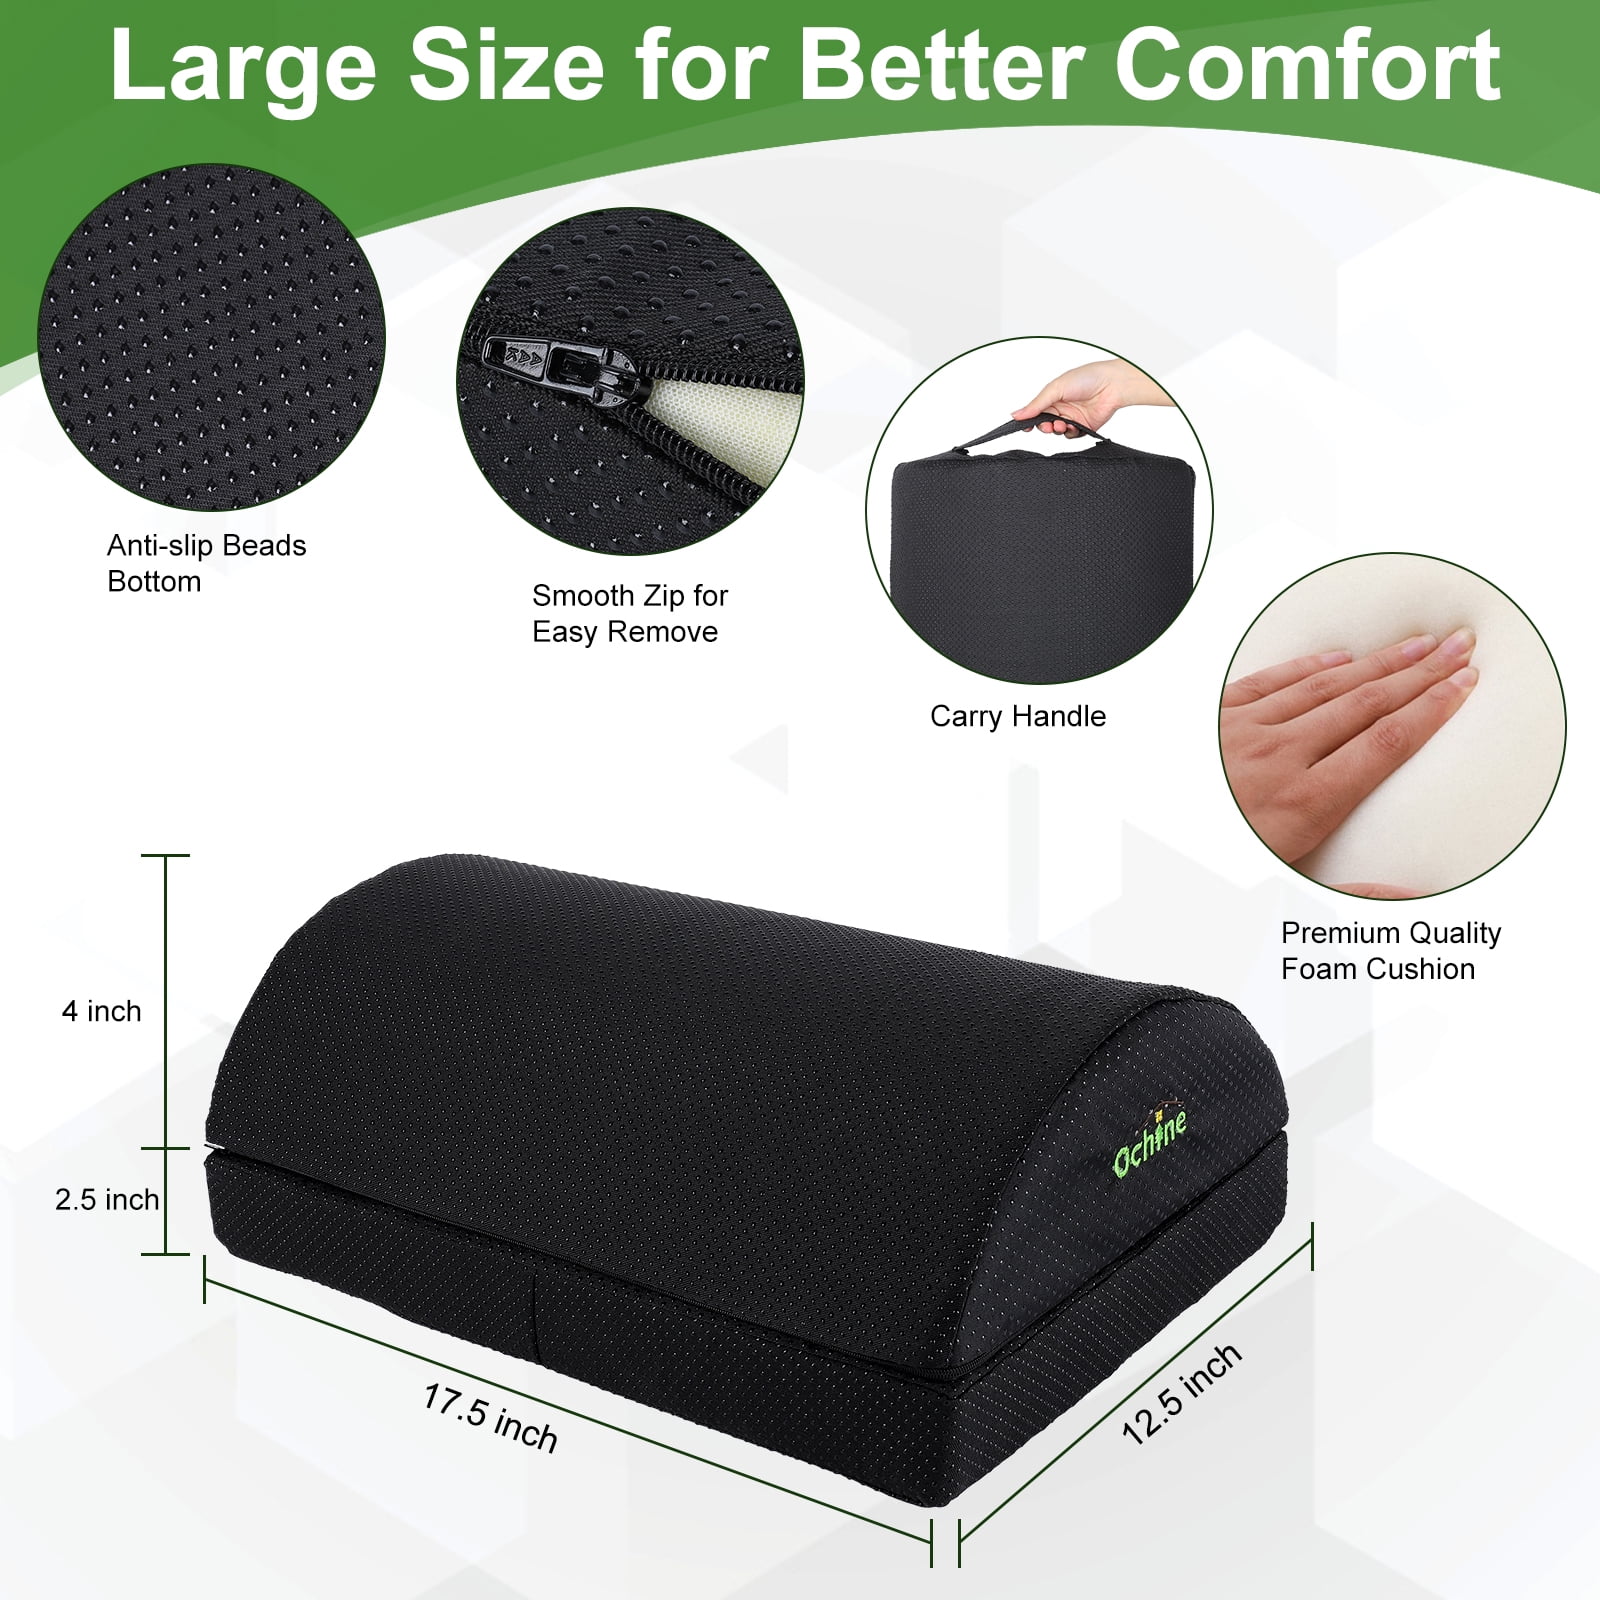 Cushion Lab Ergonomic Foot Rest for Under Desk – Patented Massage Ridge  Design Memory Foam Foot Stool Pillow for Work, Home, Gaming, Computer,  Office Chair – For Back & Hip Pain Relief 